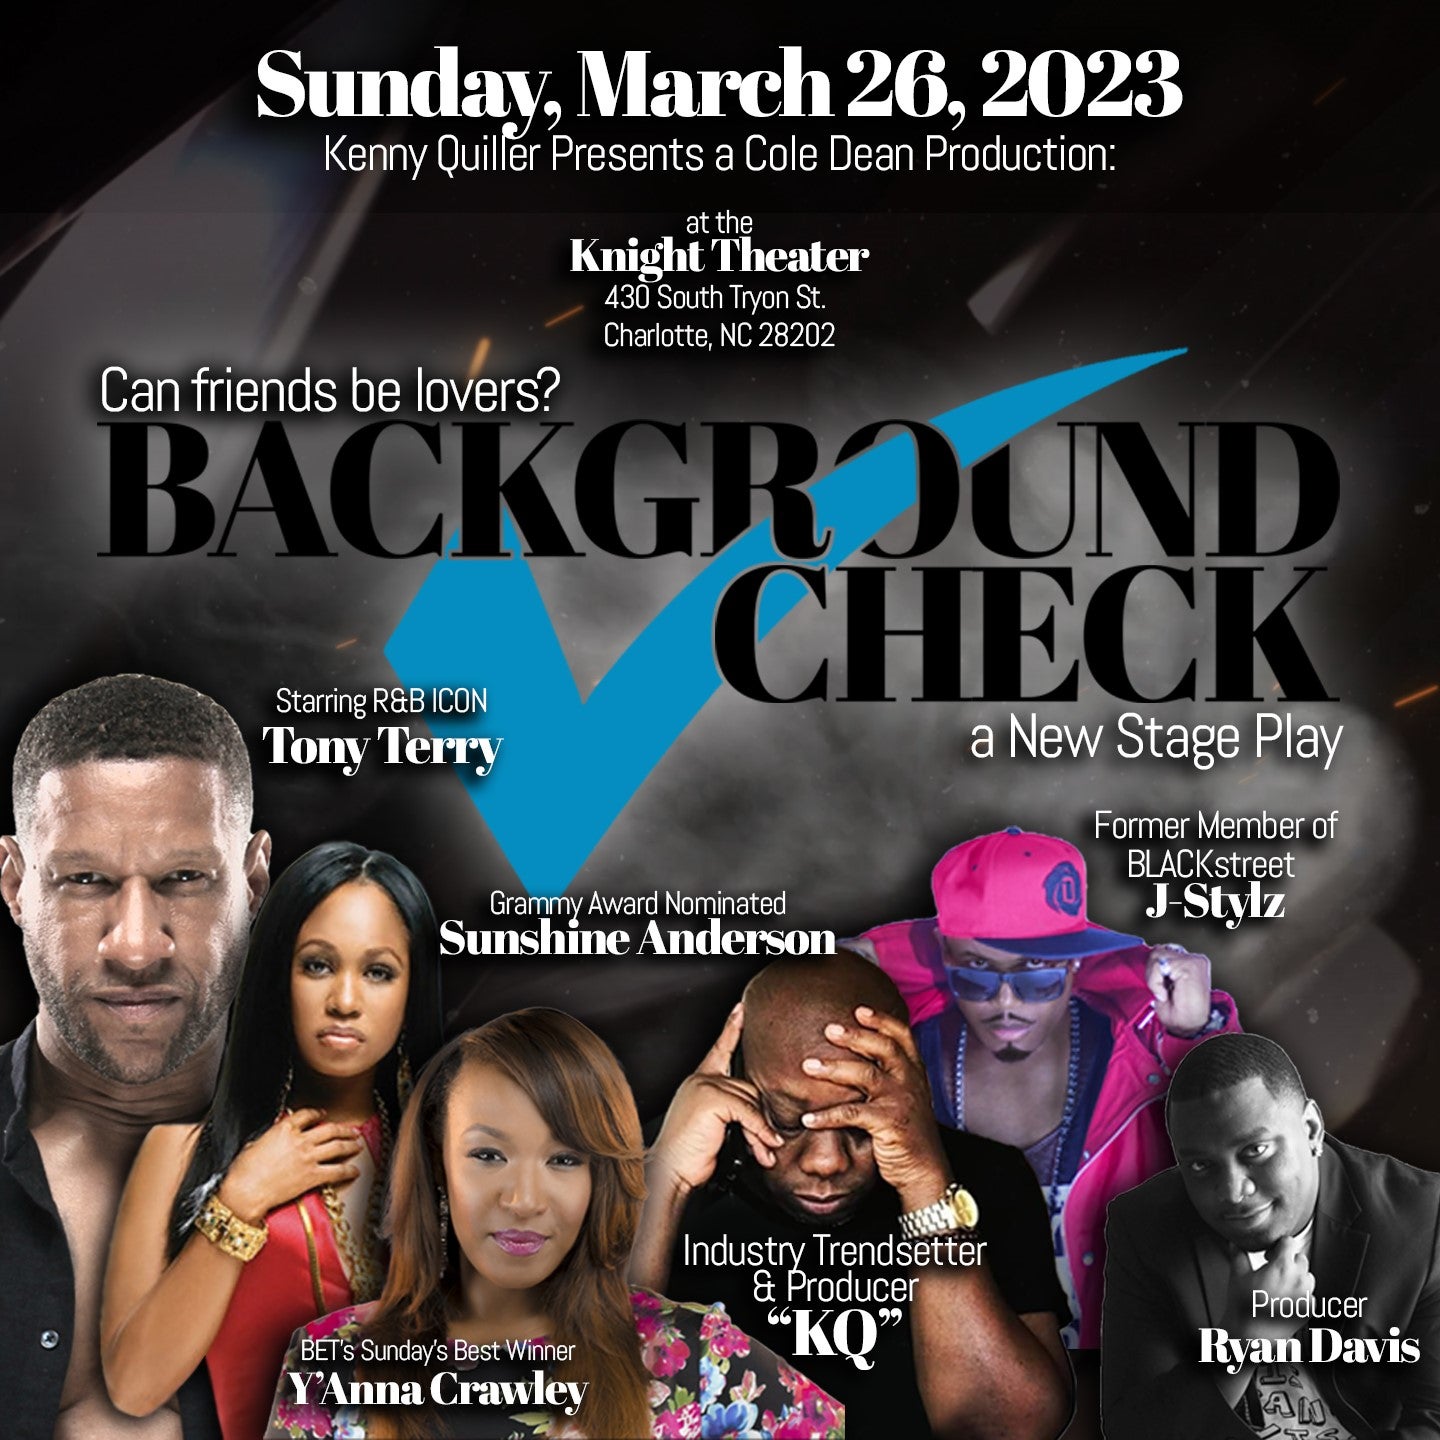 Background Check - The Stage Play at Knight Theatre